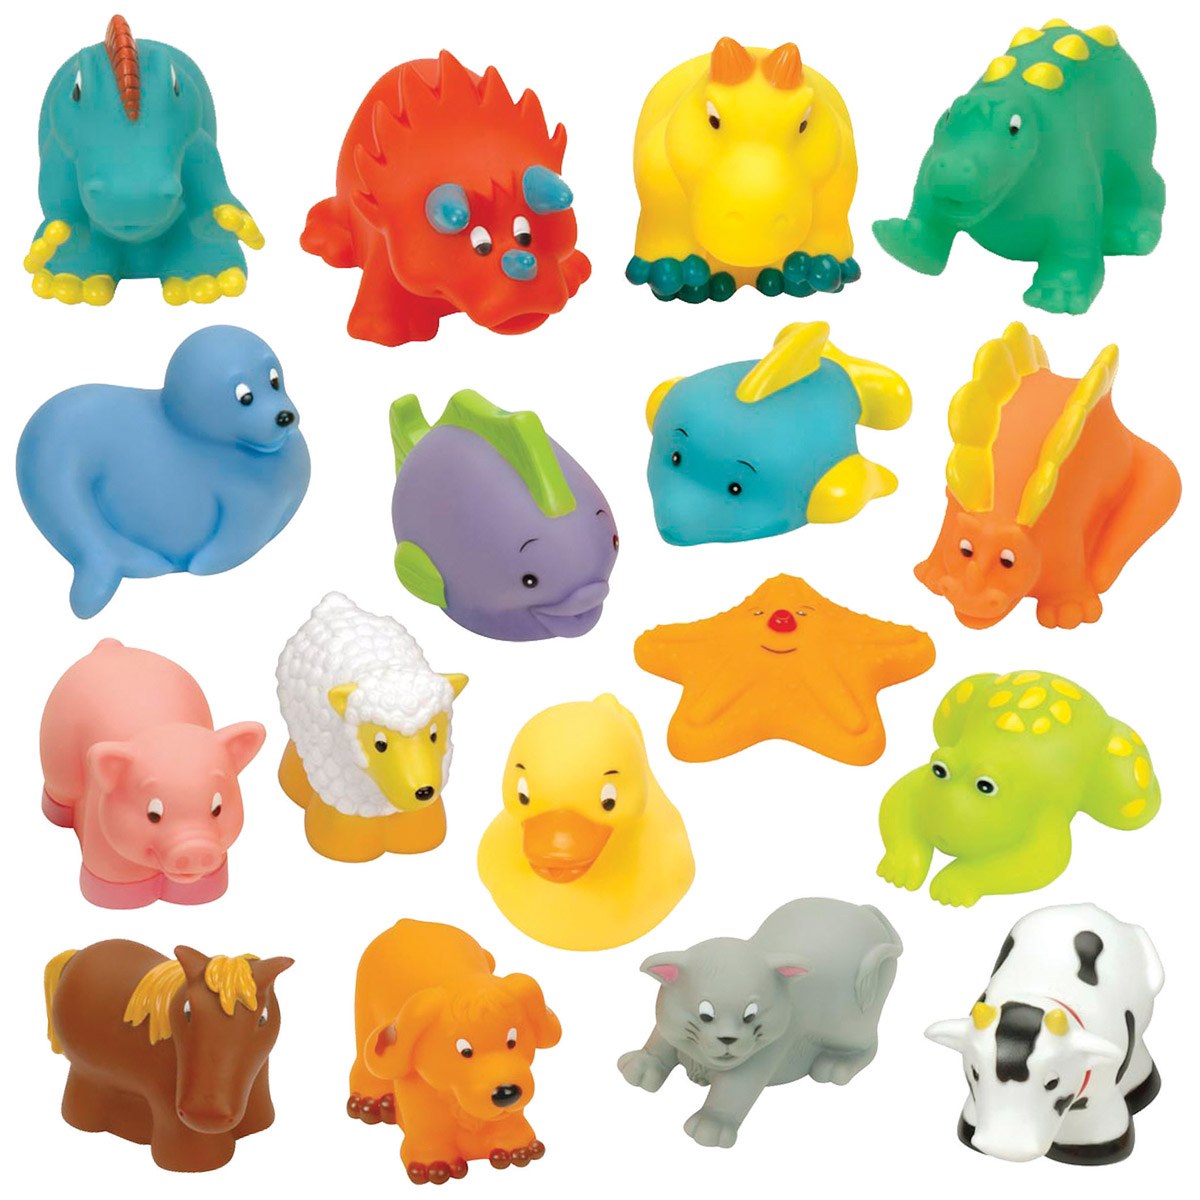 Battat My Animal and Ocean Squeezable Buddies - 17 Pieces